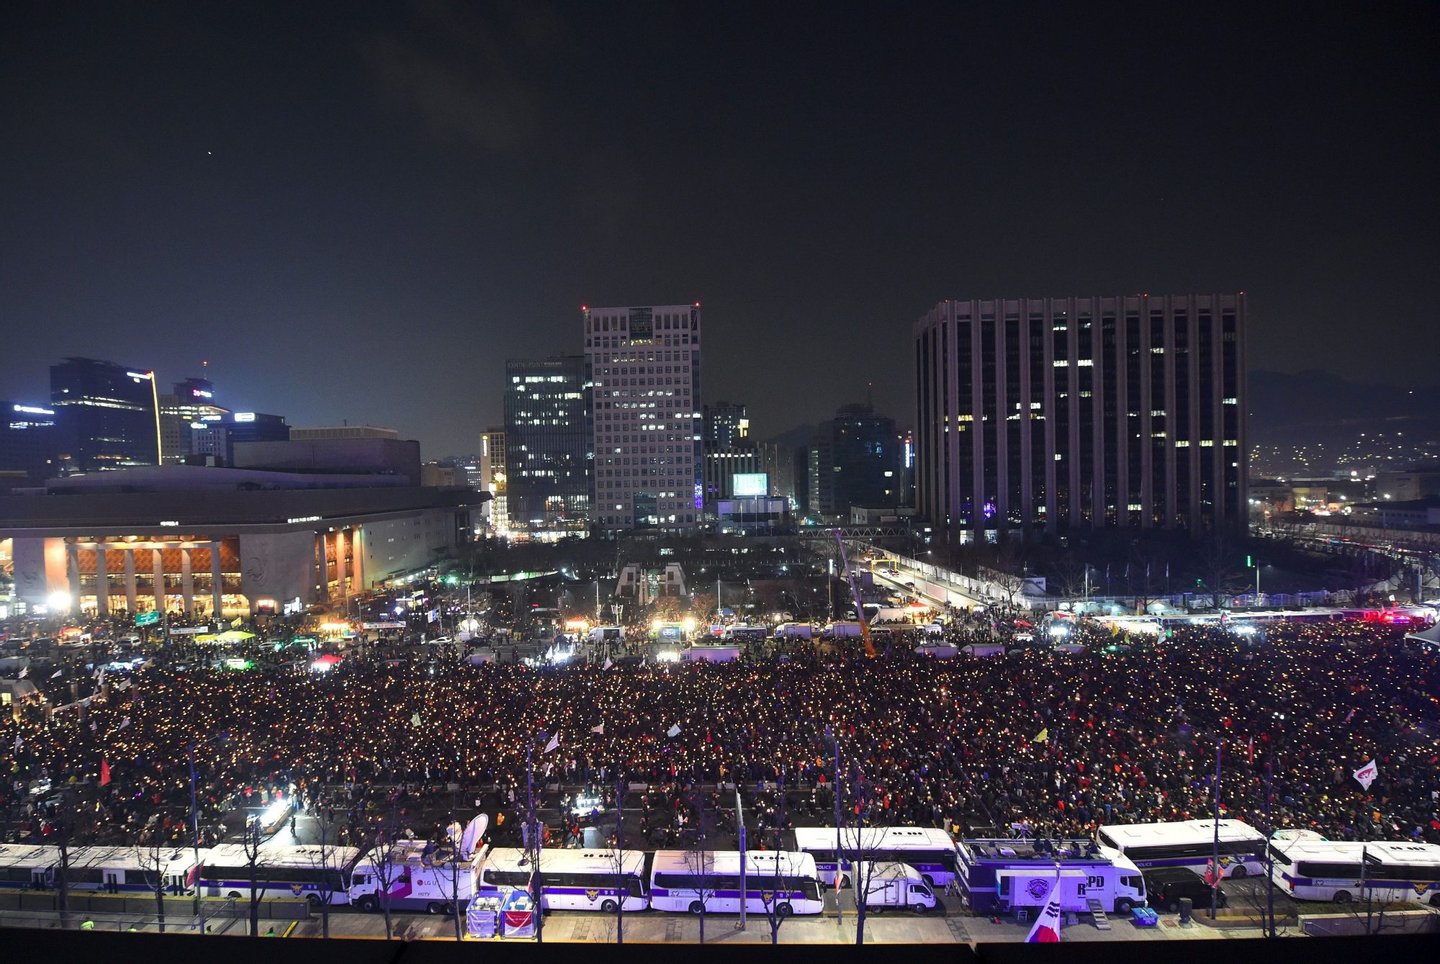 Protesters attend a candle-lit rally calling for South Korean President Park Geun-Hye's immediate departure from her office, in downtown Seoul on December 31, 2016. South Korea sees in the new year with a massive protest calling for an immediate arrest of impeached President Park Geun-Hye. / AFP / JUNG Yeon-Je (Photo credit should read JUNG YEON-JE/AFP/Getty Images)